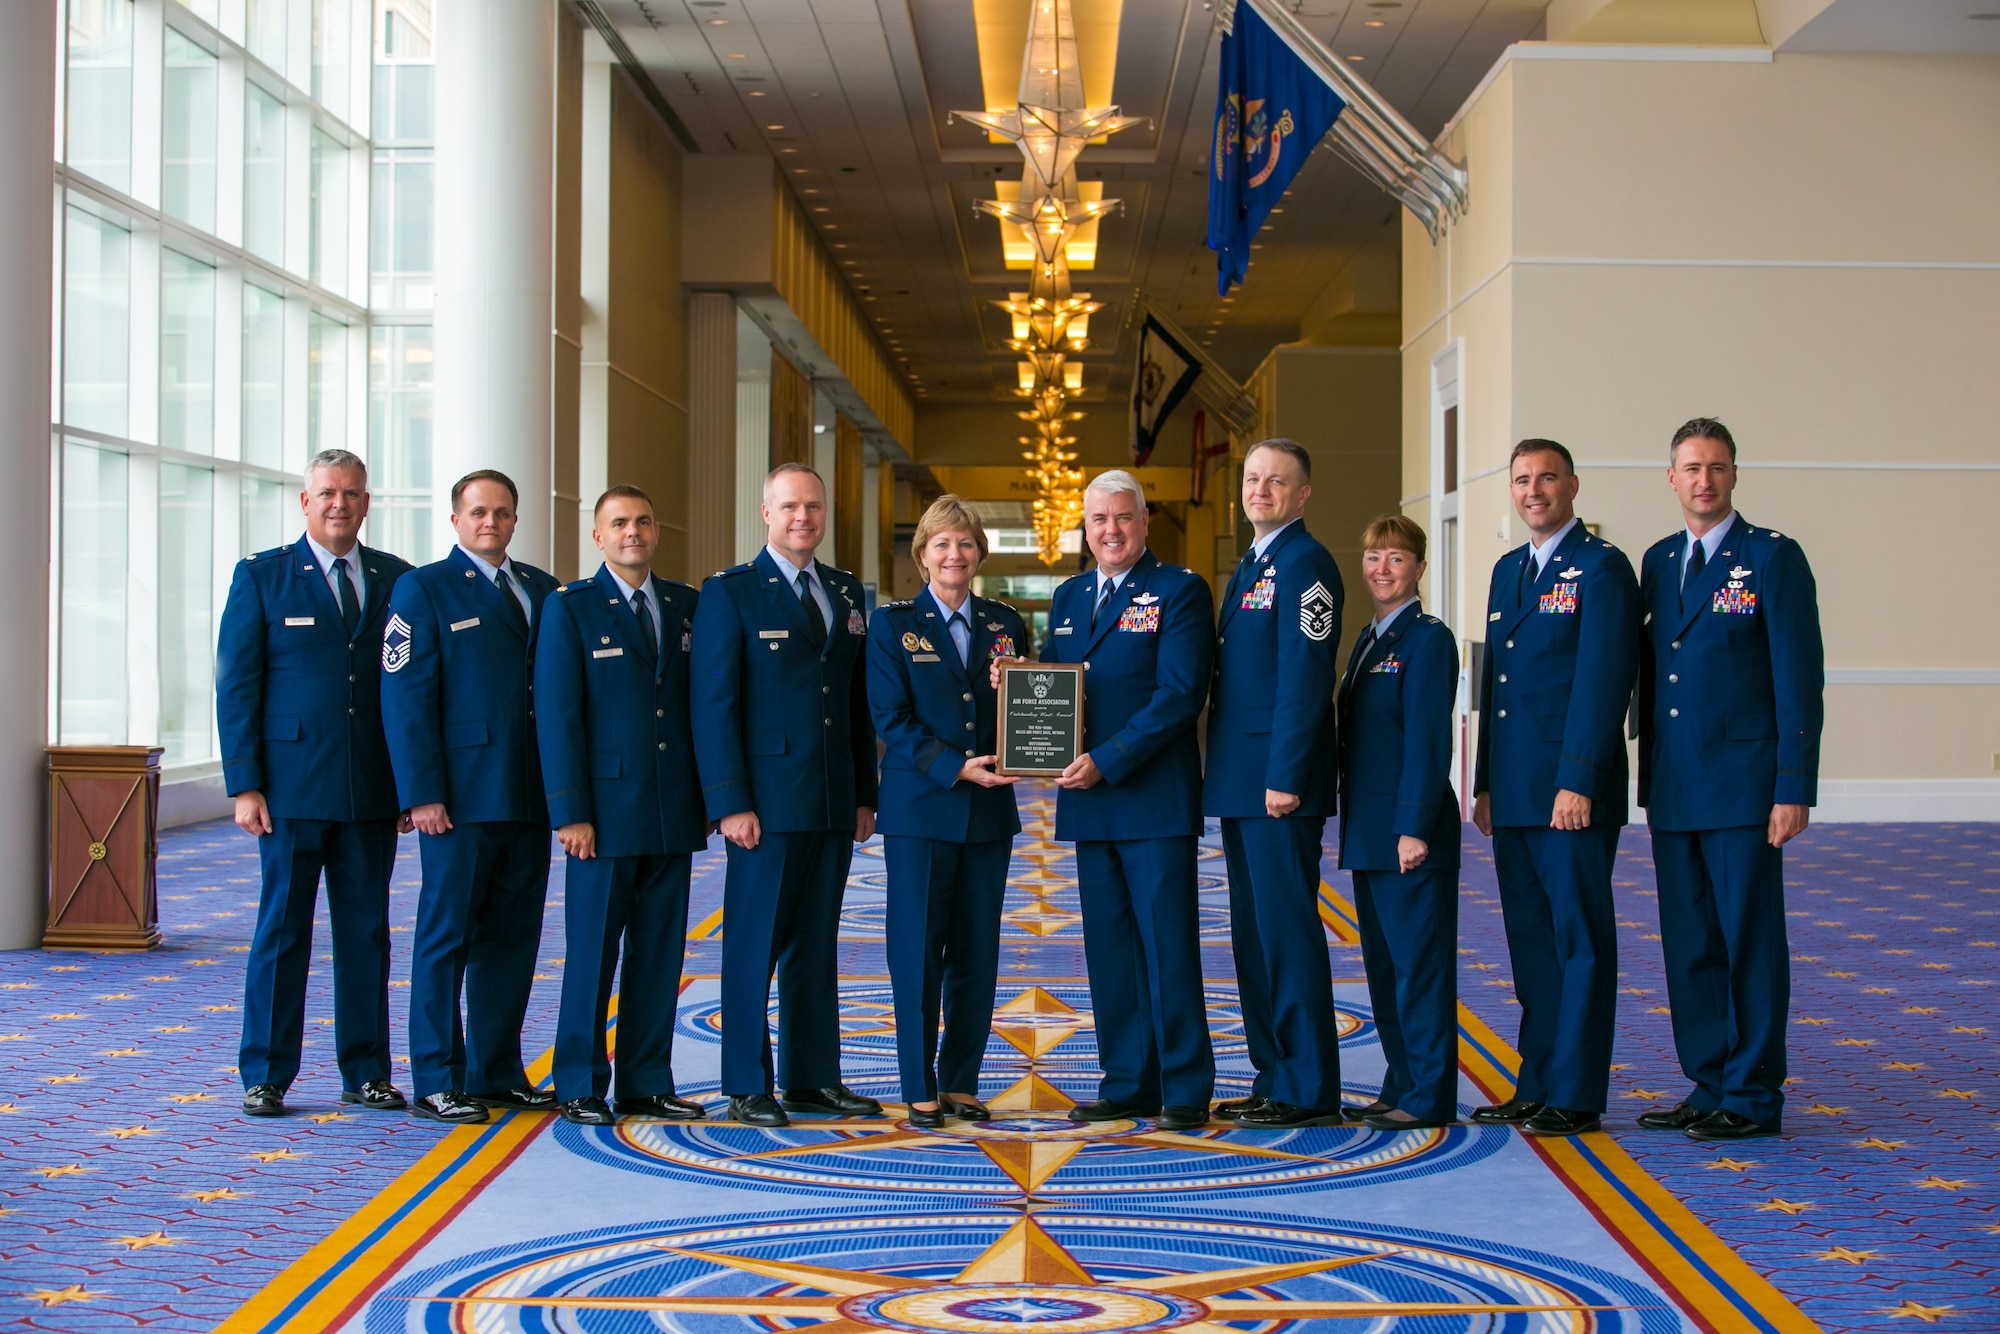 926th Wing members pose with Lt. Gen. Maryanne Miller, Chief of Air Force Reserve, upon receipt of their Air Force Association Award on Sept. 19.